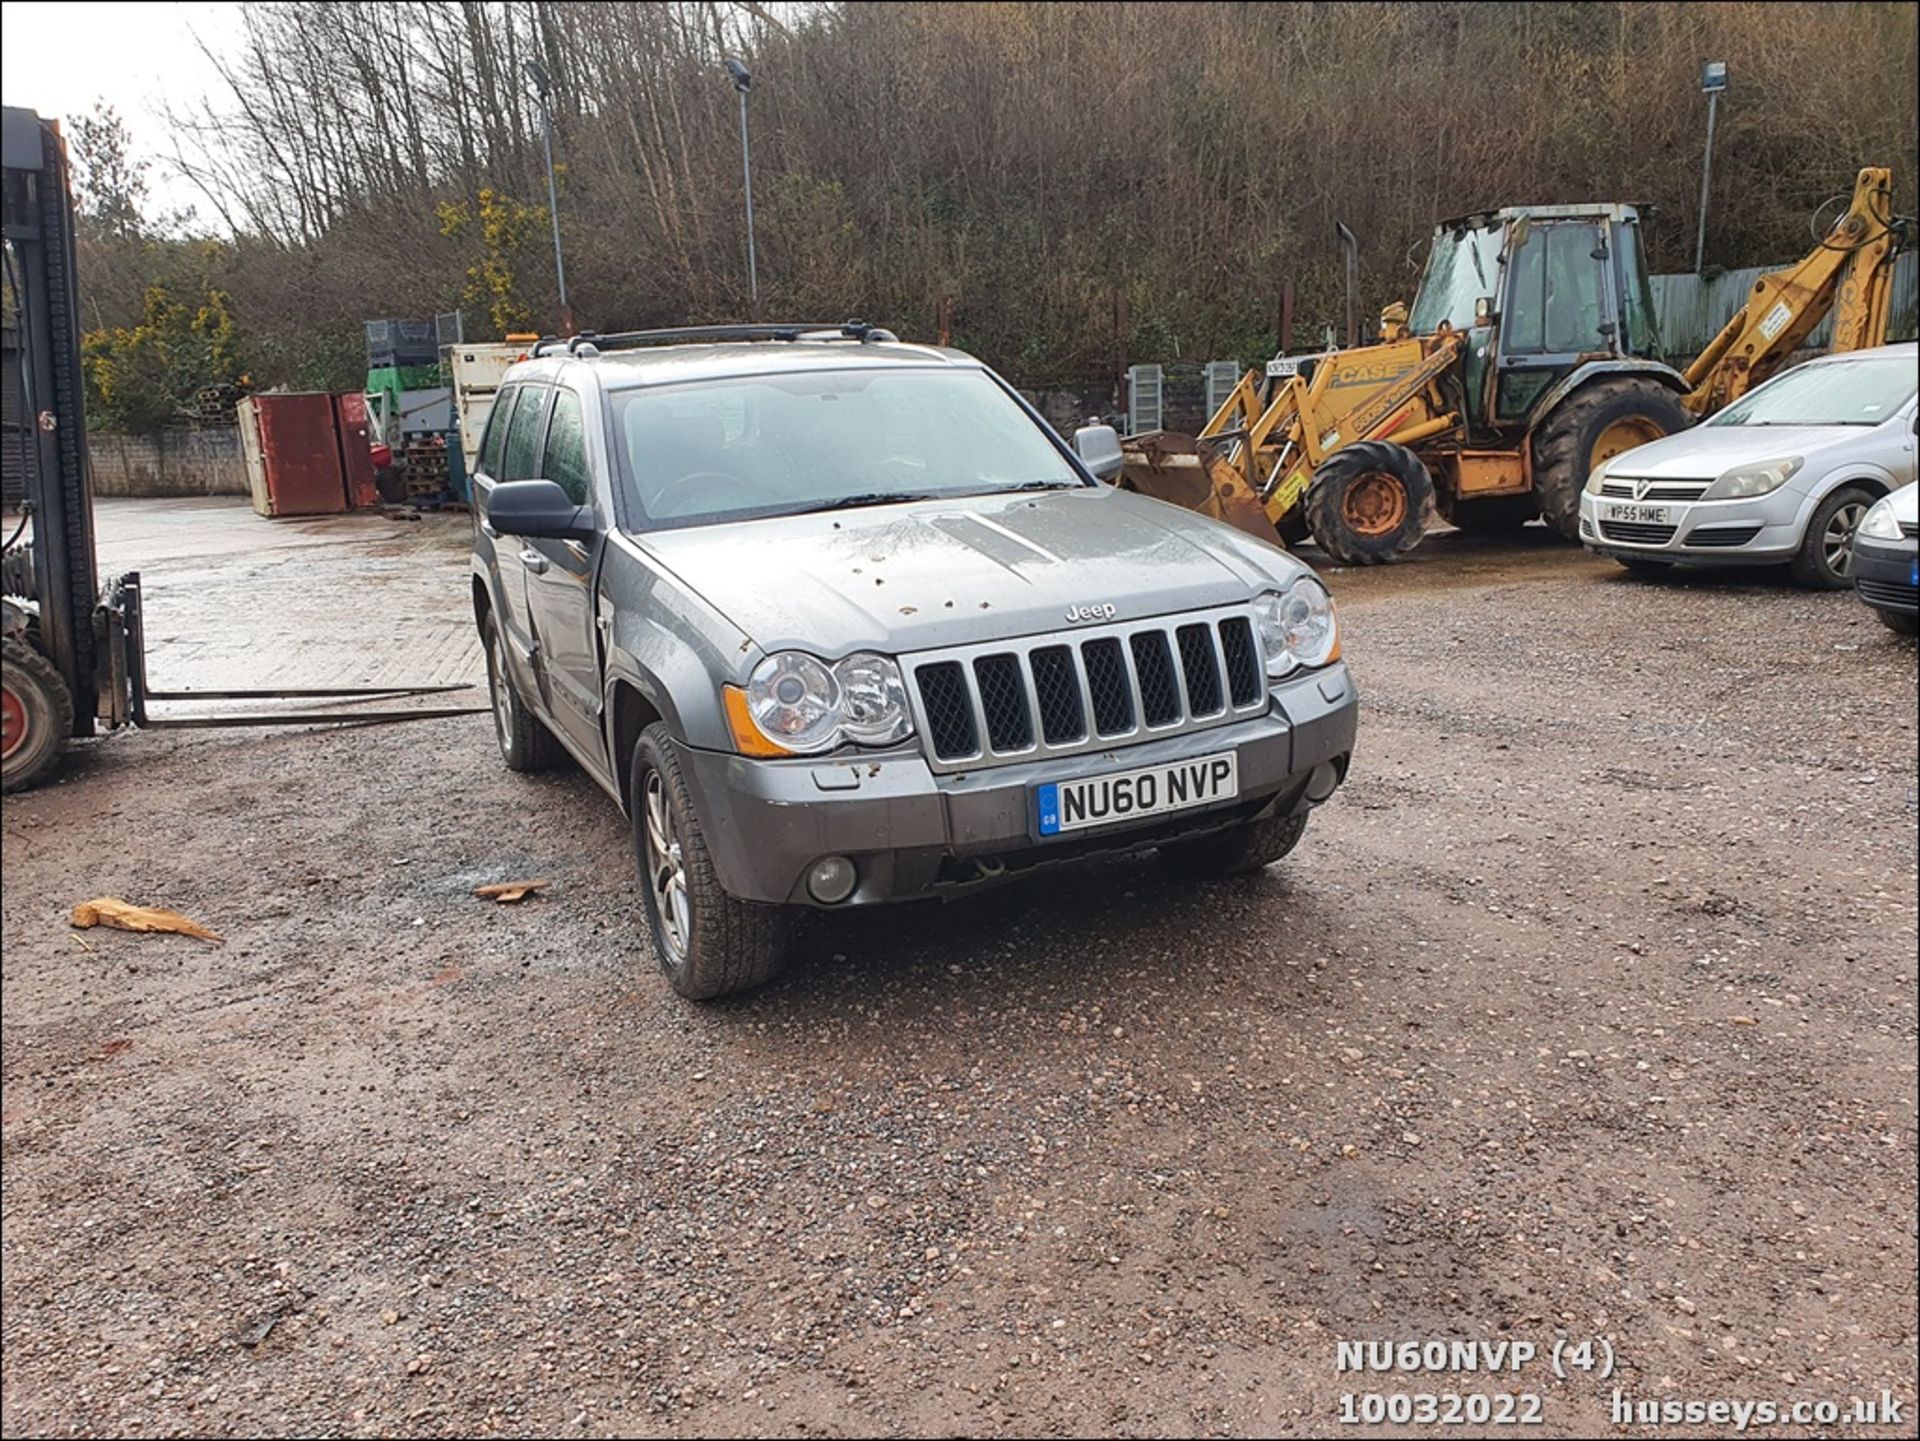 10/60 JEEP G-CHEROKEE OVERLAND CRD A - 2987cc 5dr Estate (Grey, 154k) - Image 5 of 47